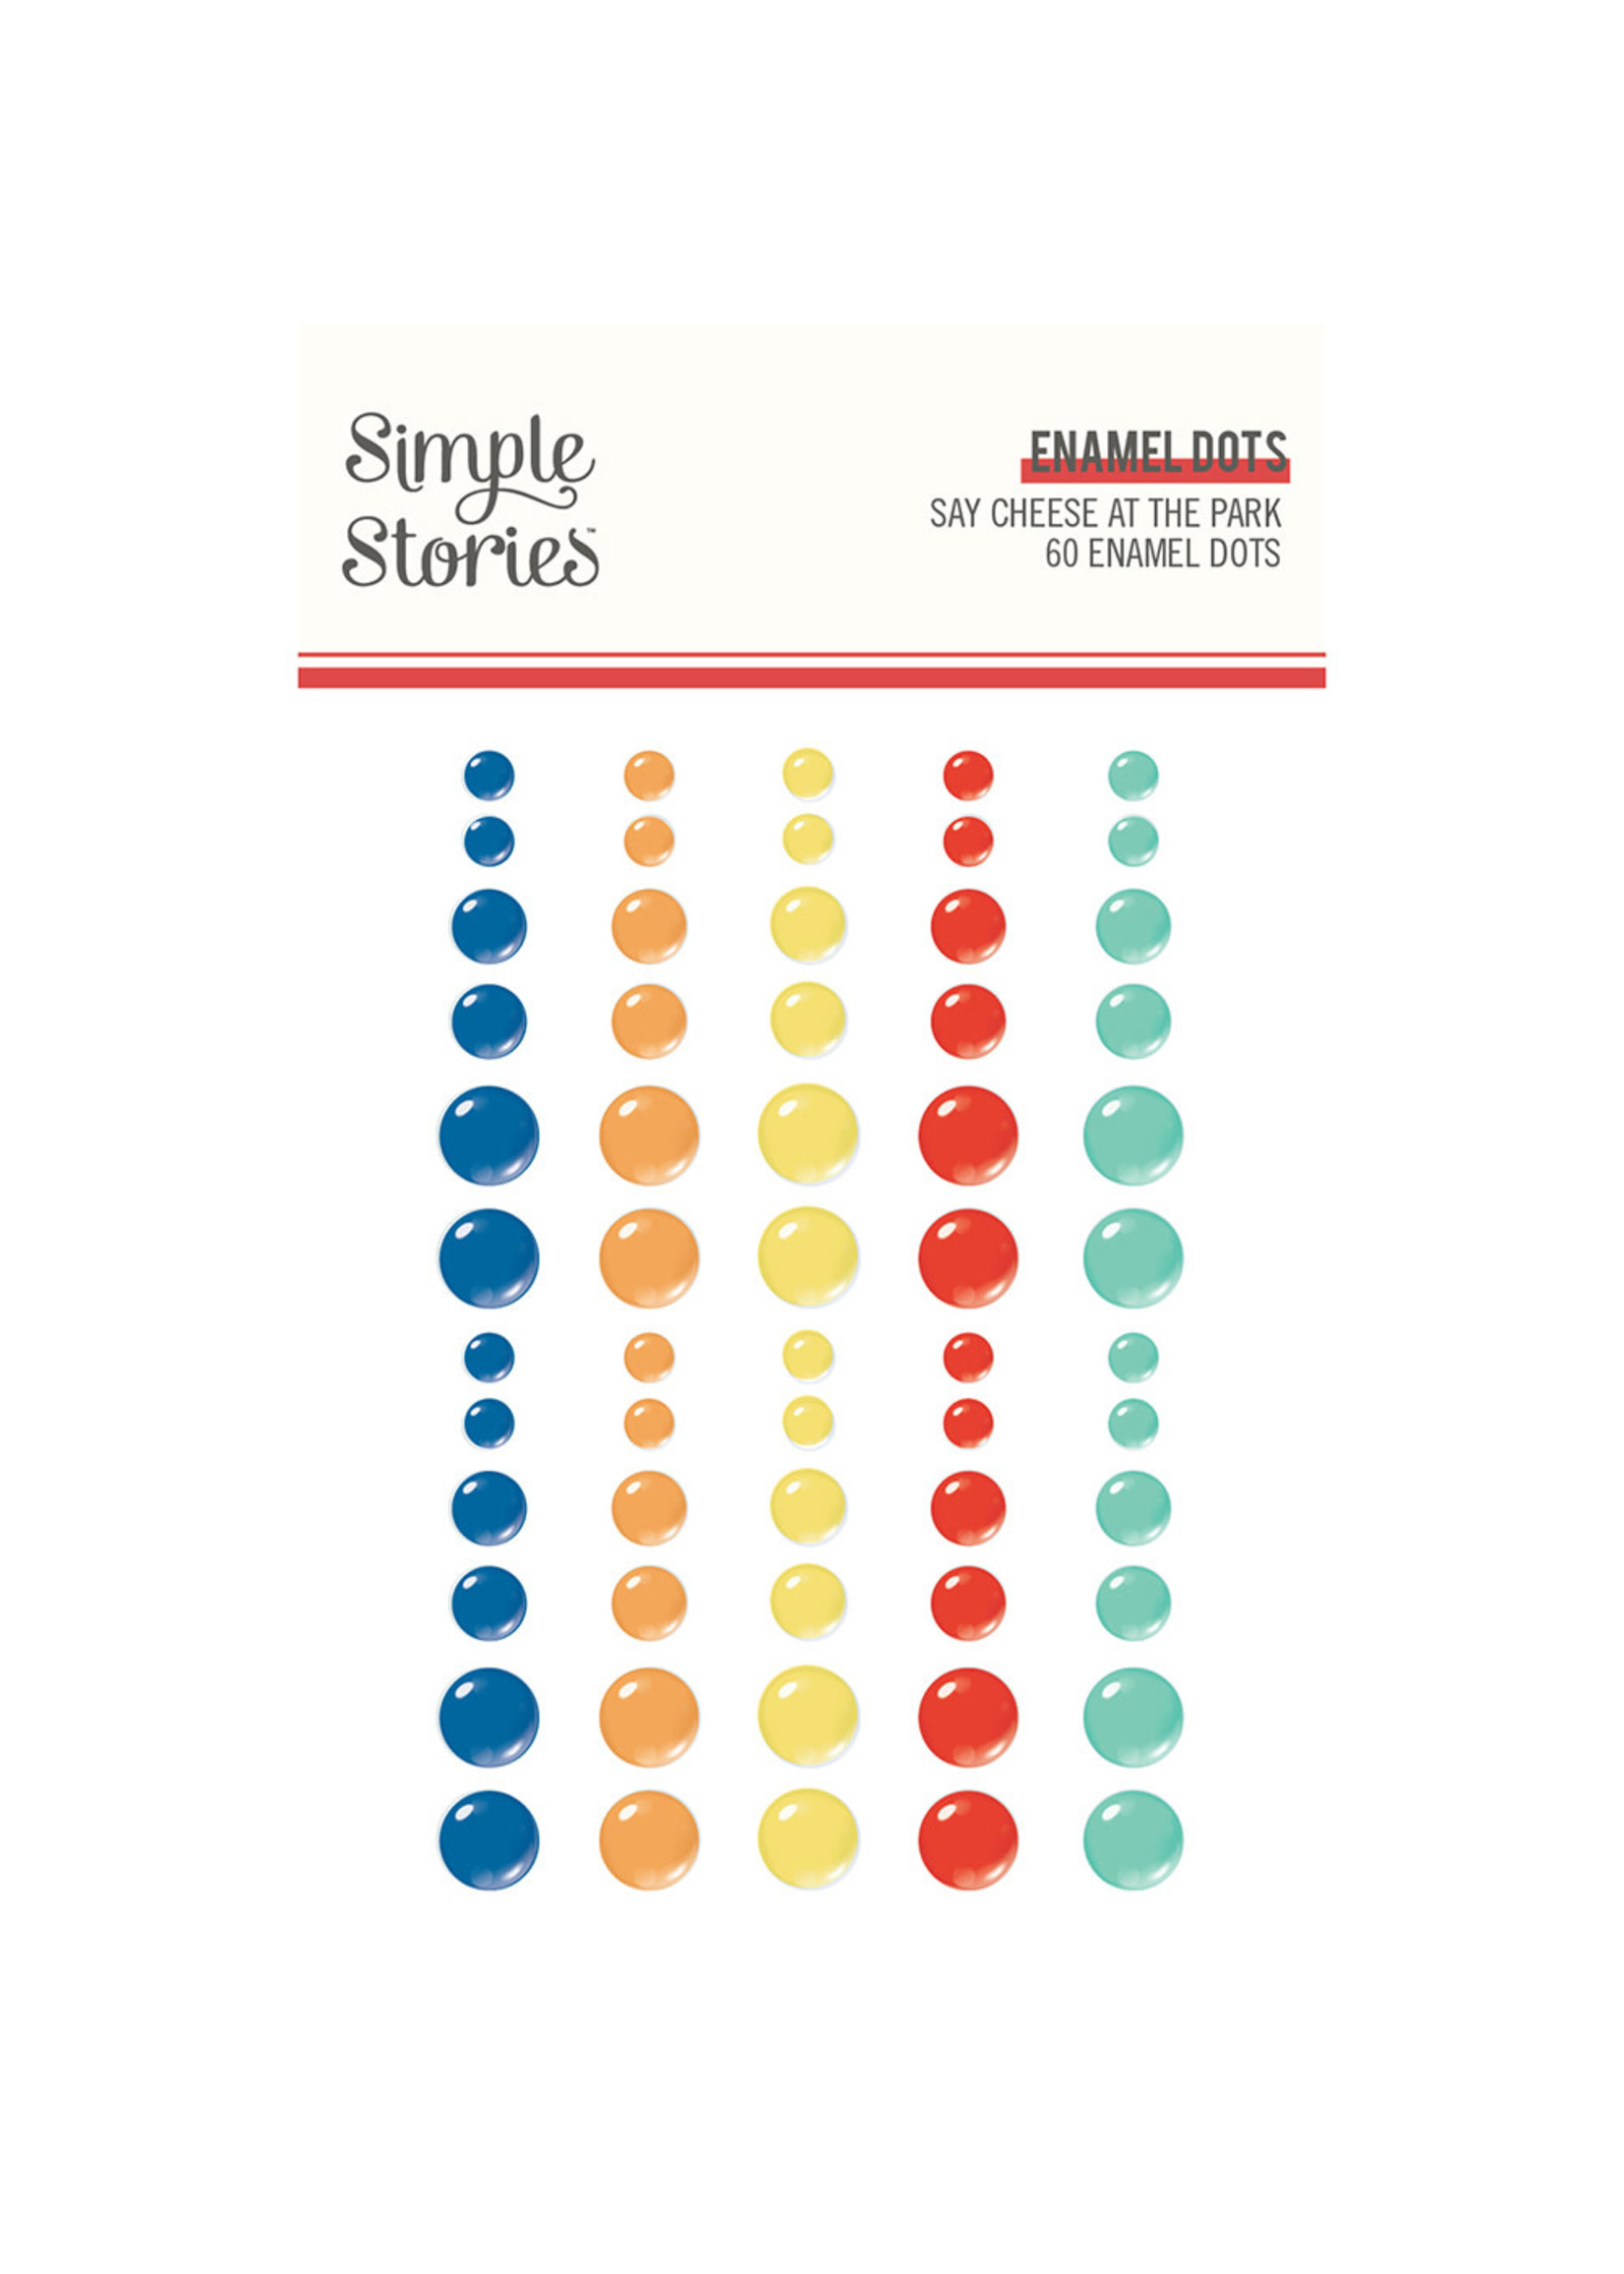 Simple Stories Say Cheese At the Park - Enamel Dots